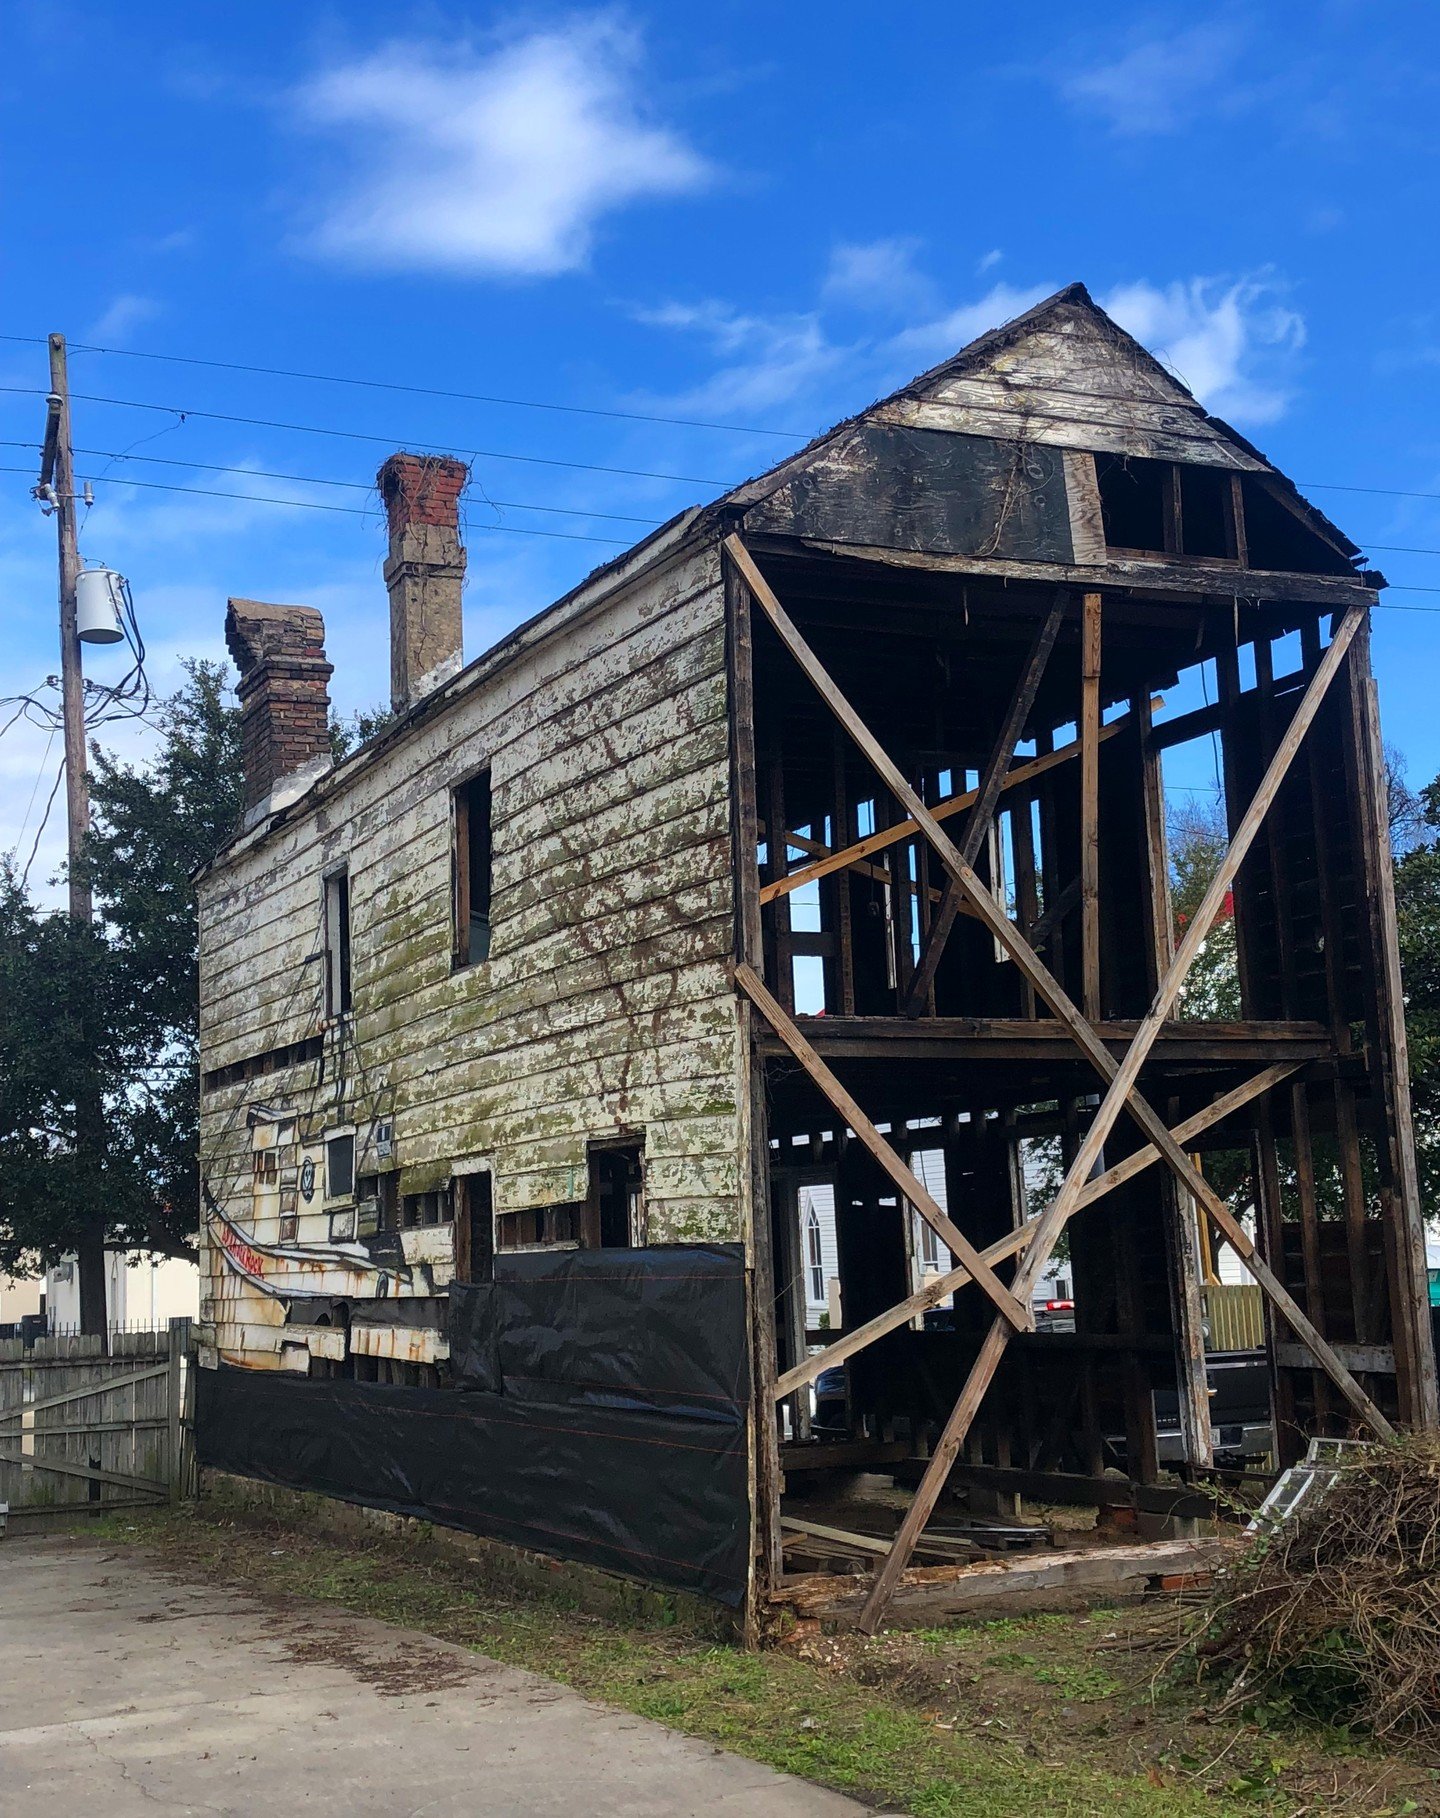 Hamilton Builders loves a challenge!

Originally built in 1830, this historic &quot;Charleston single&quot; was brought back to life. Hamilton Builders worked closely with the city&rsquo;s Board of Architectural Review to restore the architecture of 